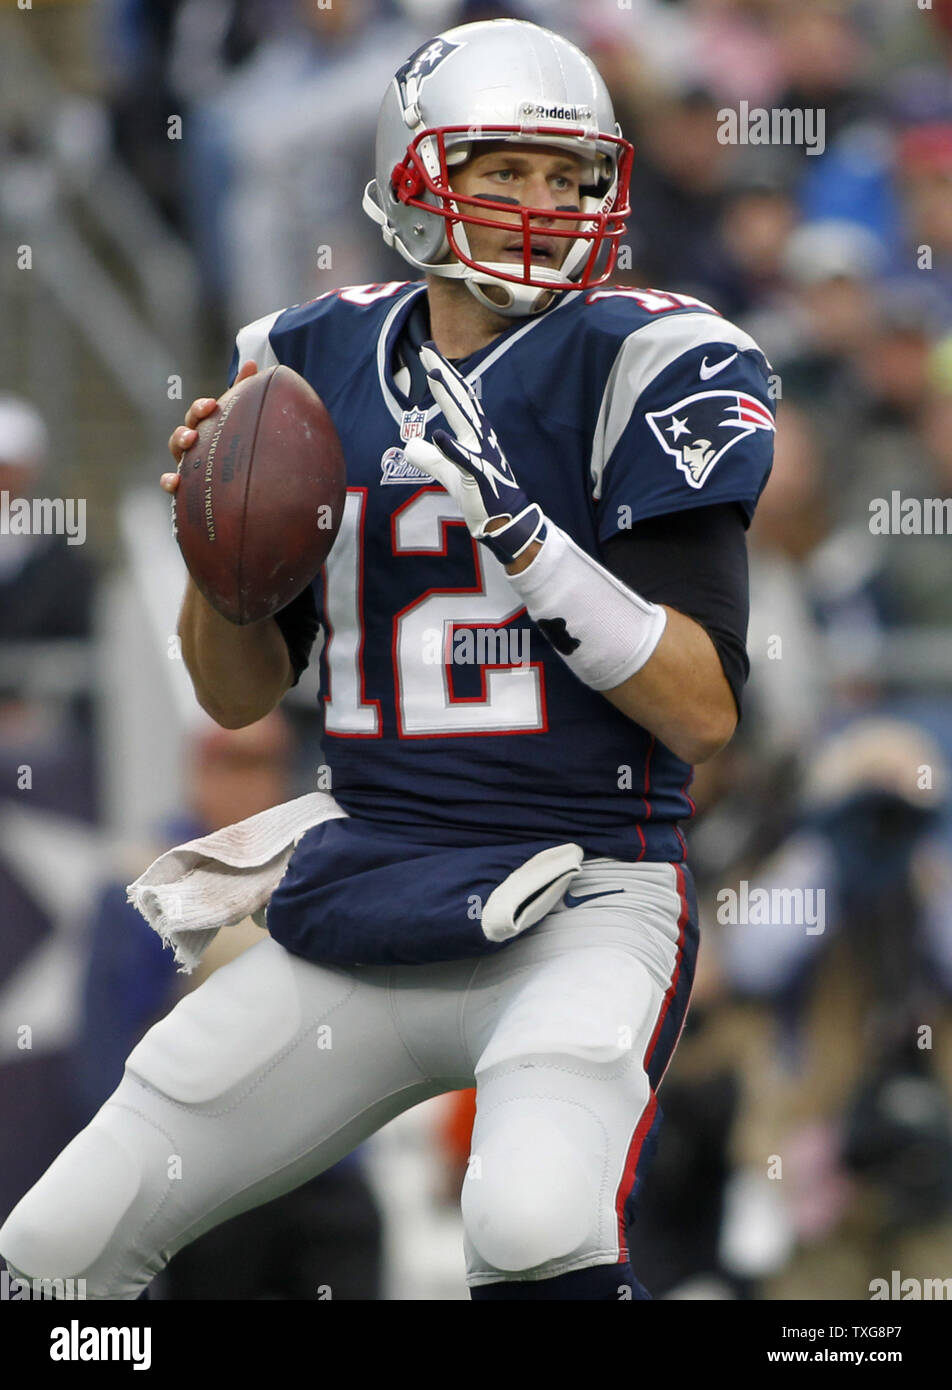 New England Patriots quarterback Tom Brady drops back for a pass in the second quarter against the Denver Broncos at Gillette Stadium in Foxboro, Massachusetts on October 7, 2012.  UPI/Matthew Healey Stock Photo